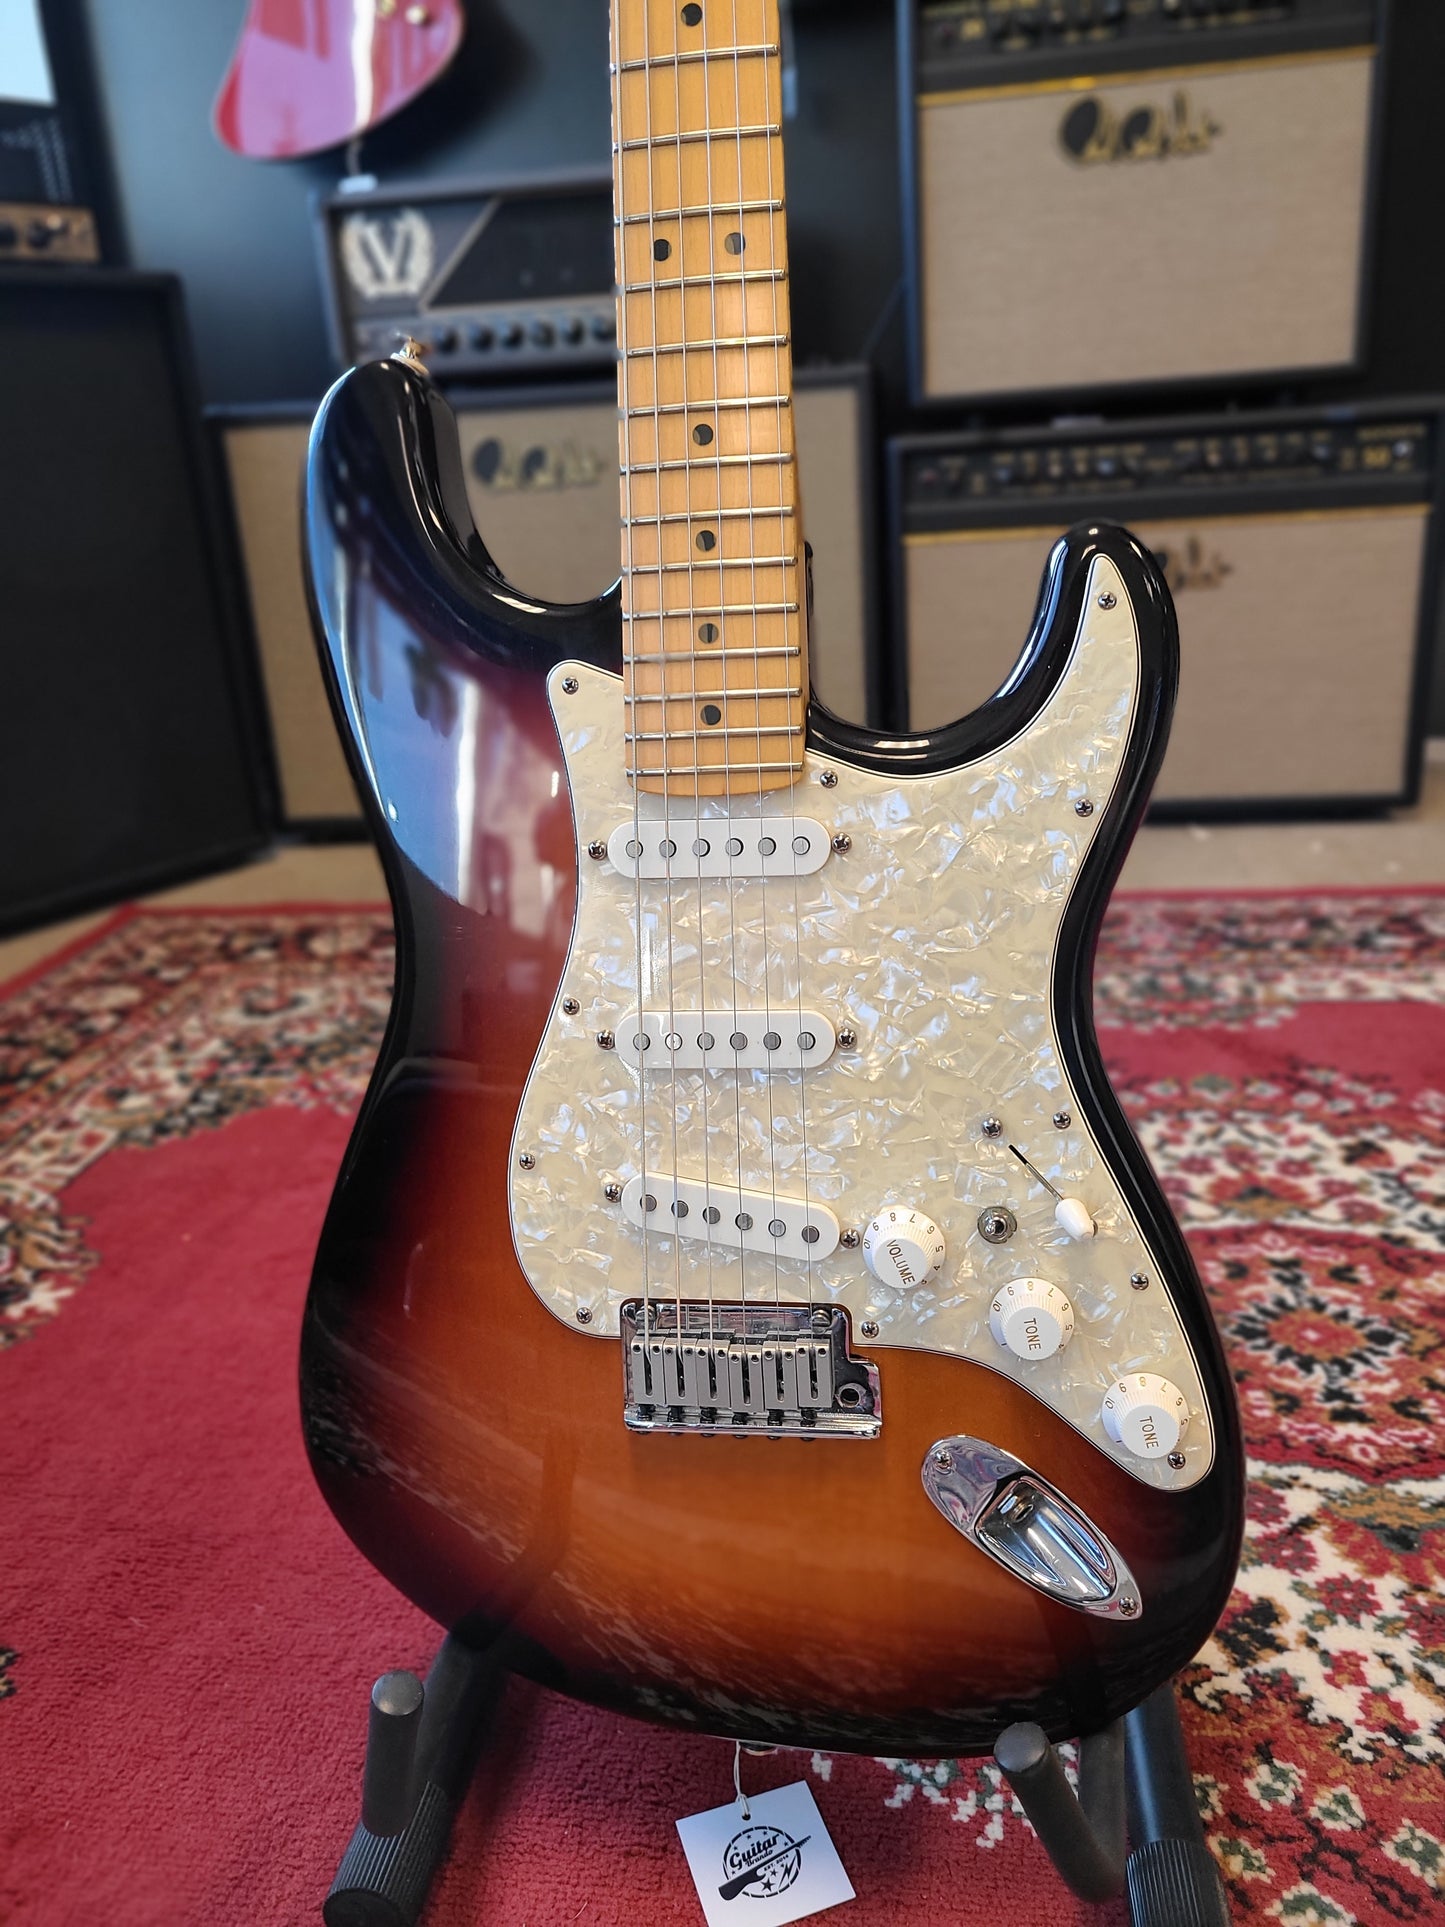 USED 1996 Fender American USA Stratocaster Strat Plus